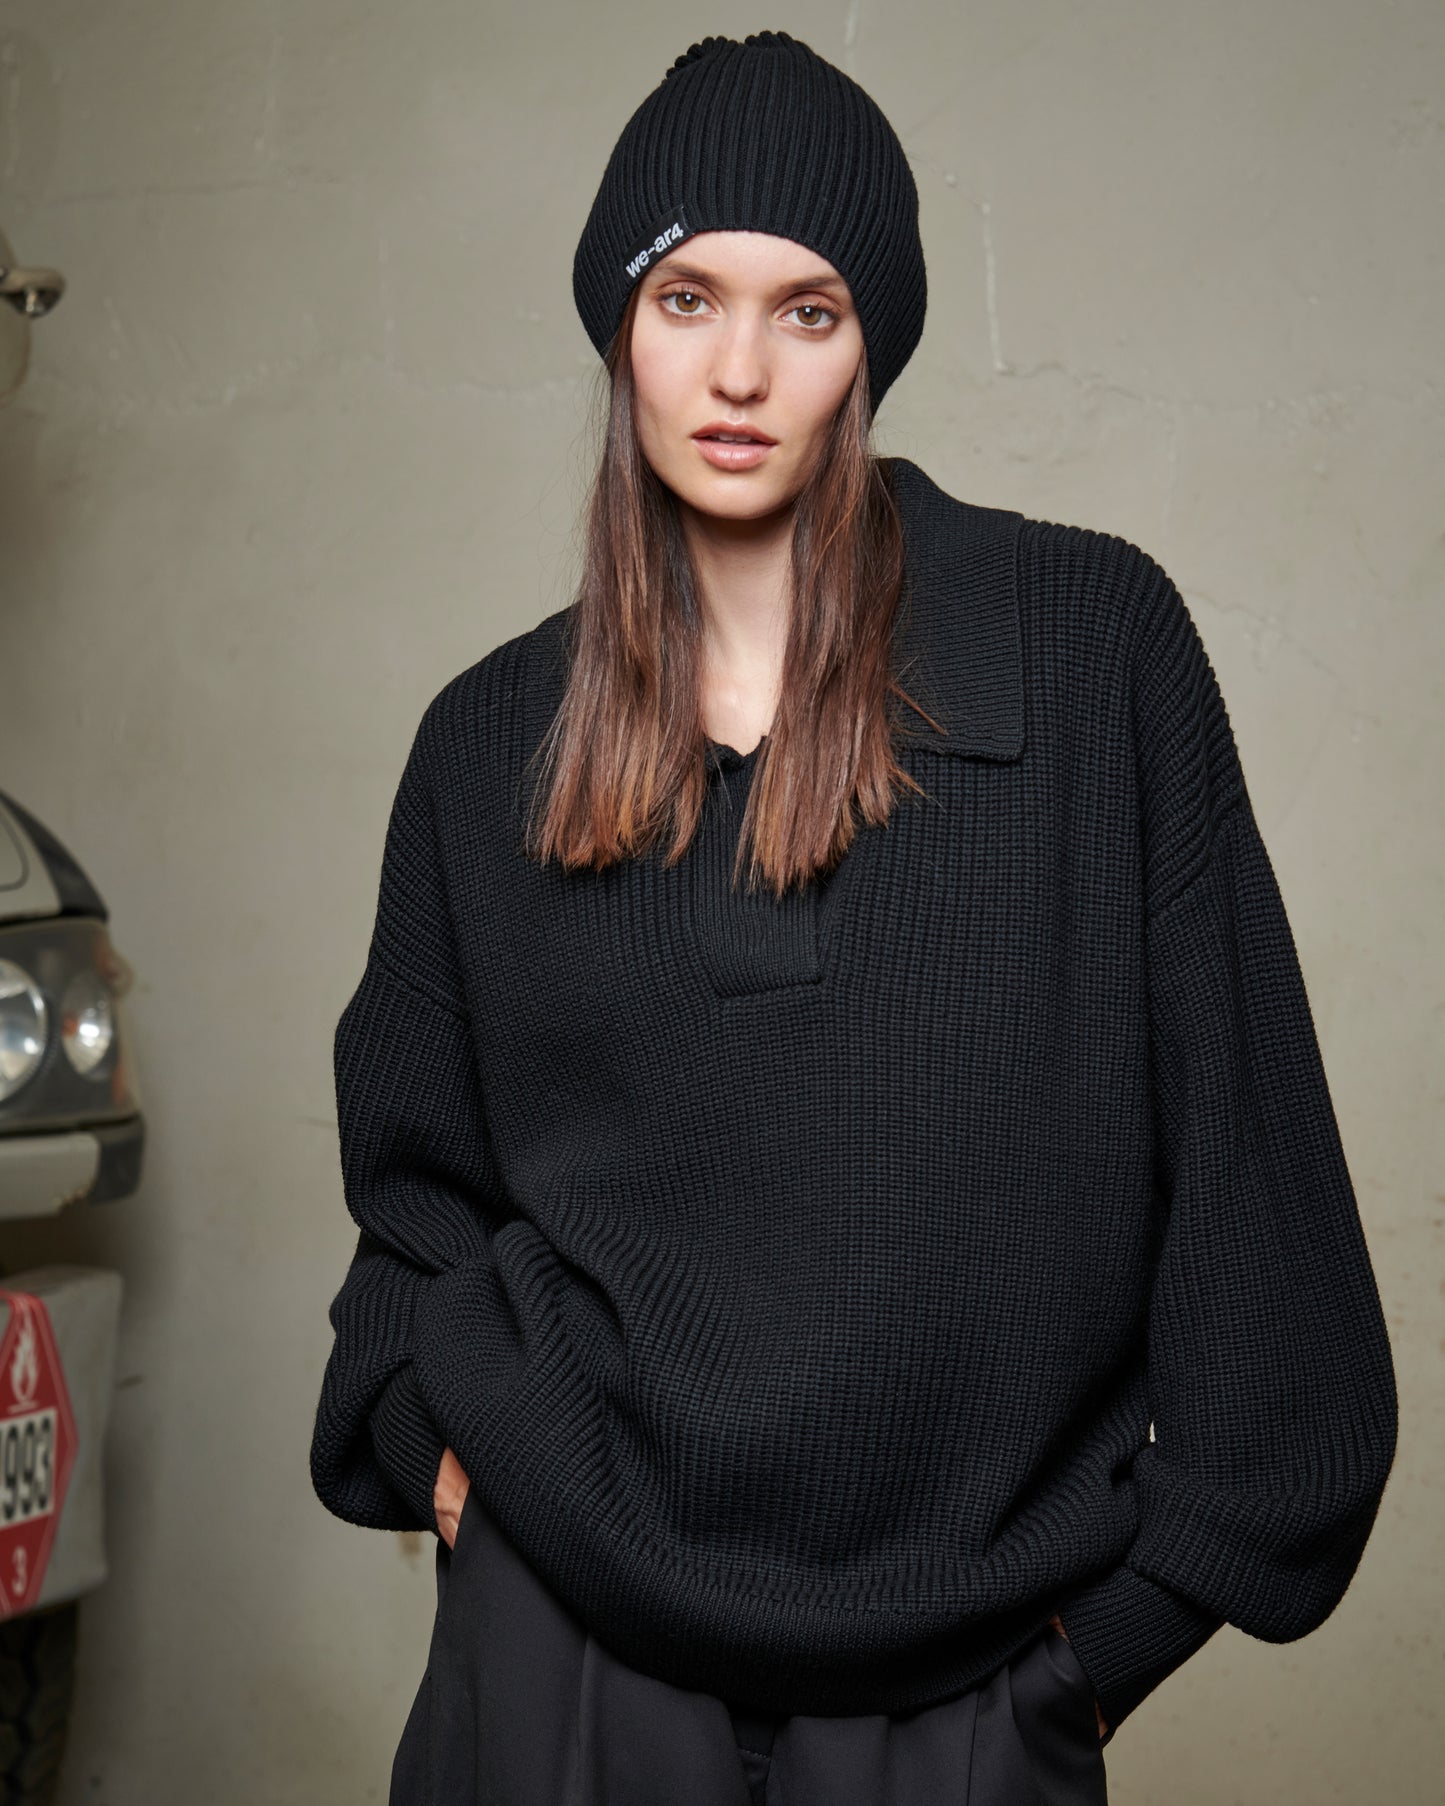 Oversize Knitted Polo